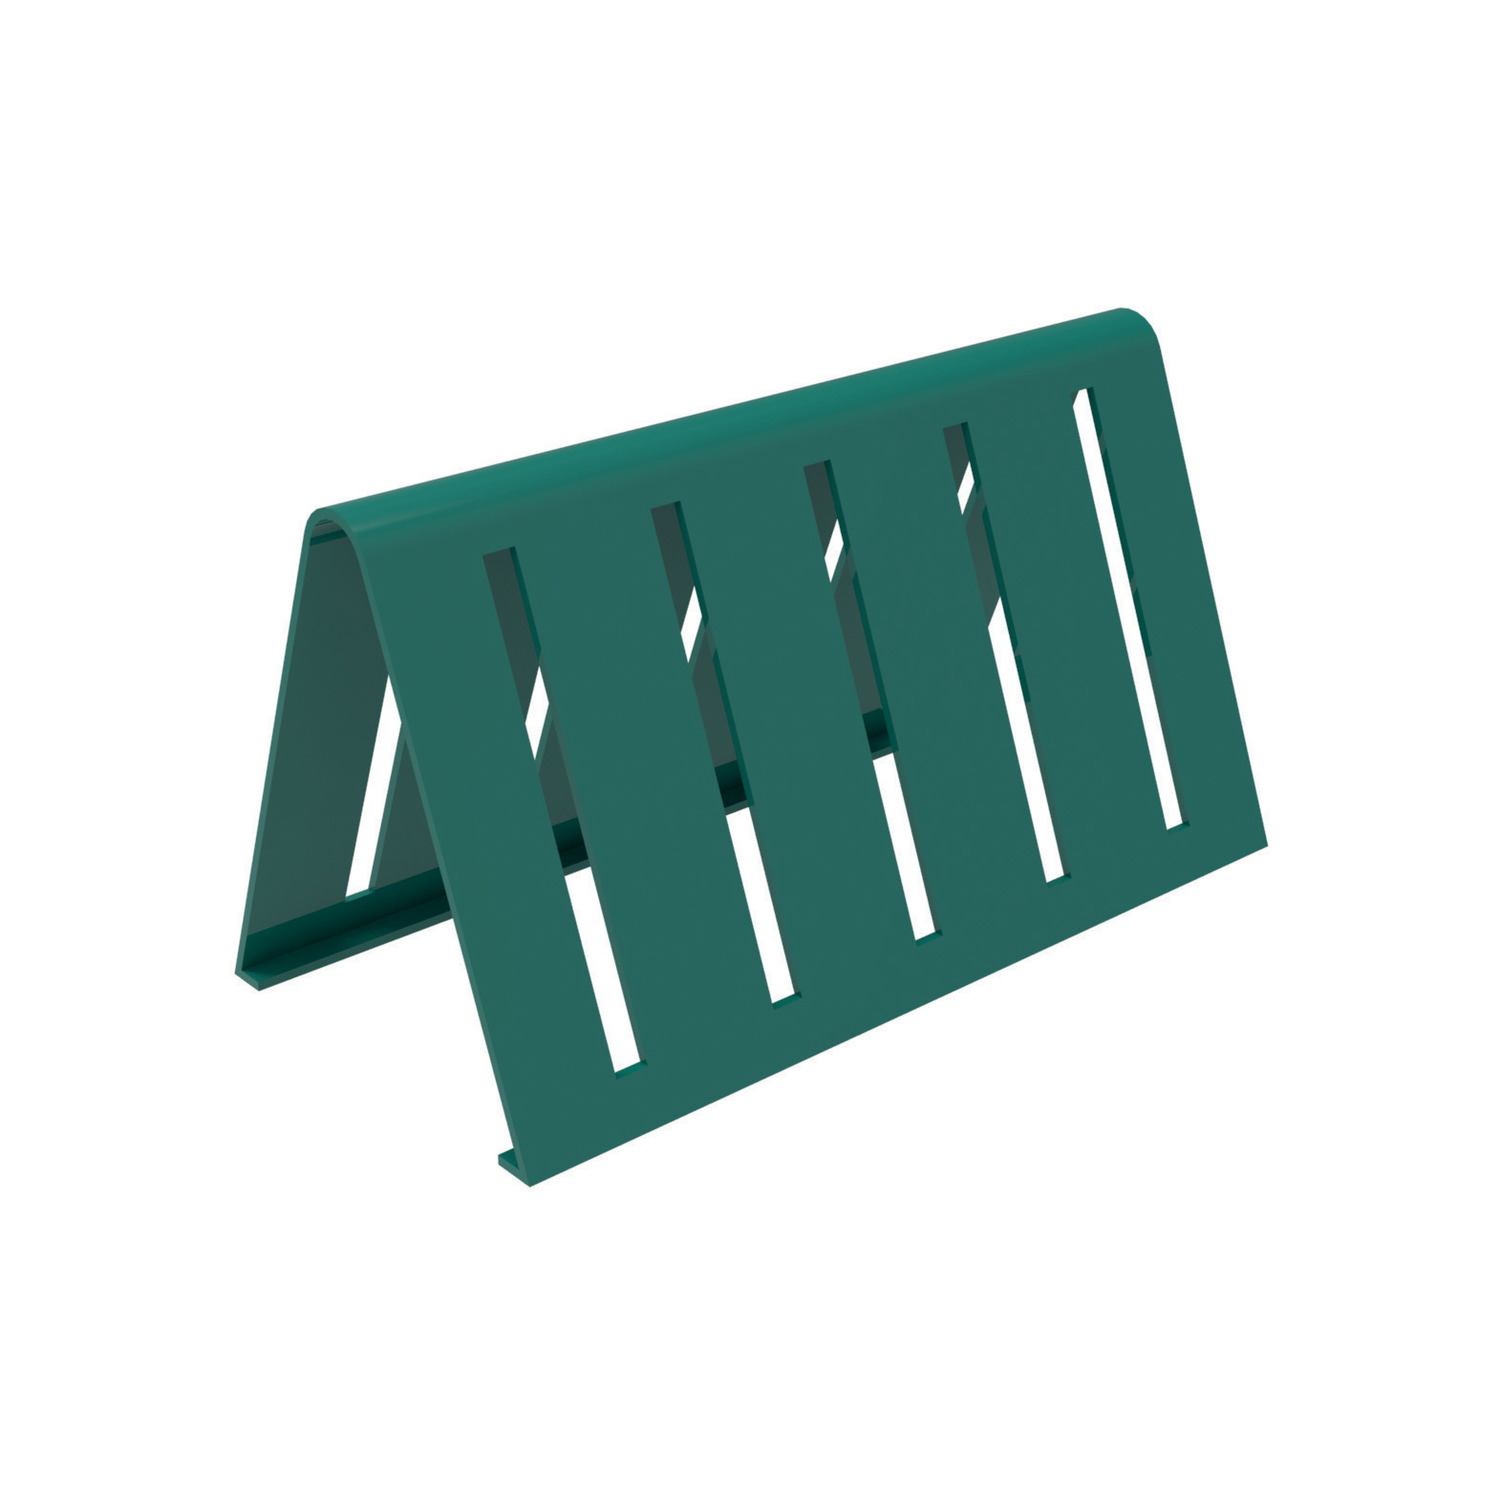 Product 19838, Holder Racks For Parallels - AccuSnap for use with AccuSnap parallels & angles / 